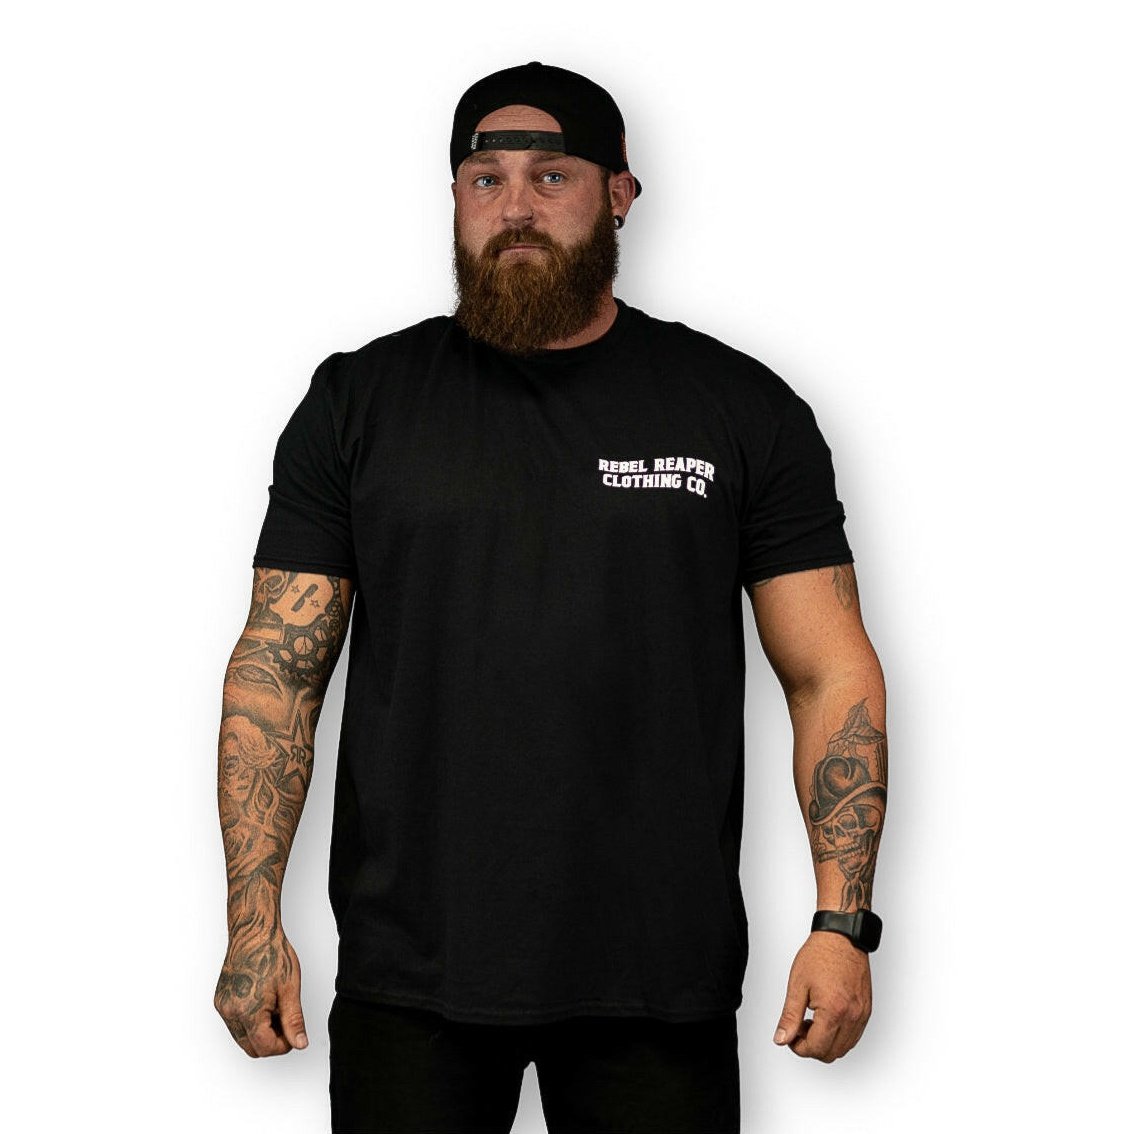 Wild One's Never Die Black T-Shirt - Rebel Reaper Clothing Company T-Shirt